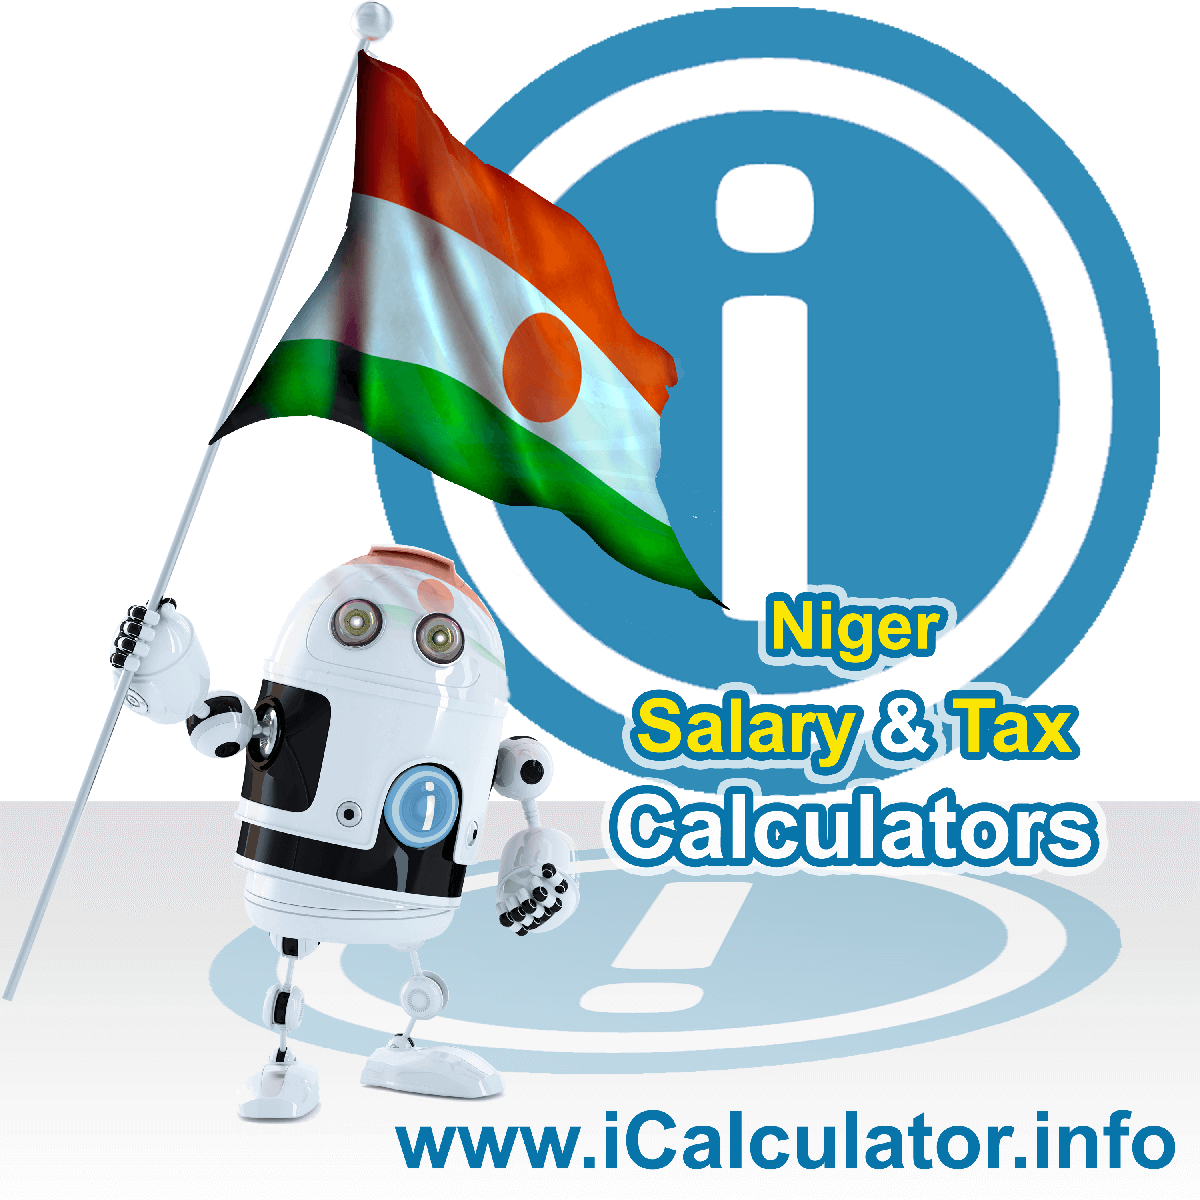 Niger Salary Calculator. This image shows the Nigerese flag and information relating to the tax formula for the Niger Tax Calculator